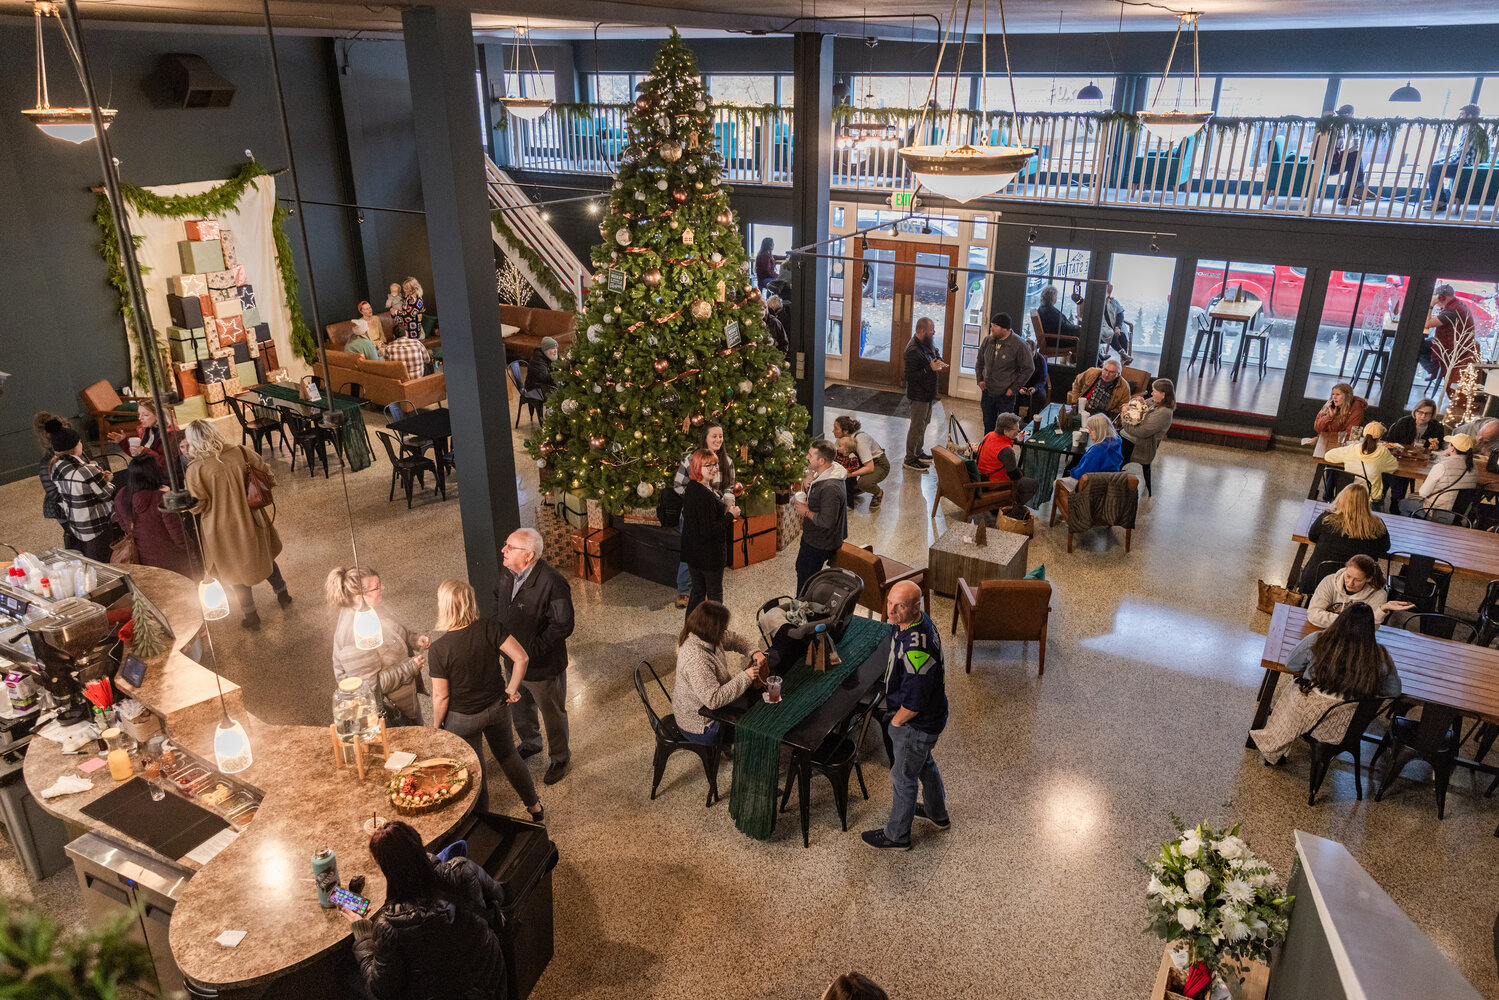 Visitors mingle around a Christmas tree inside The Station powered by Lewis County Coffee Company in downtown Centralia on Friday, Nov. 17. After a week of renovations, the downtown Centralia business held a grand re-opening to showcase its fresh look on Friday.